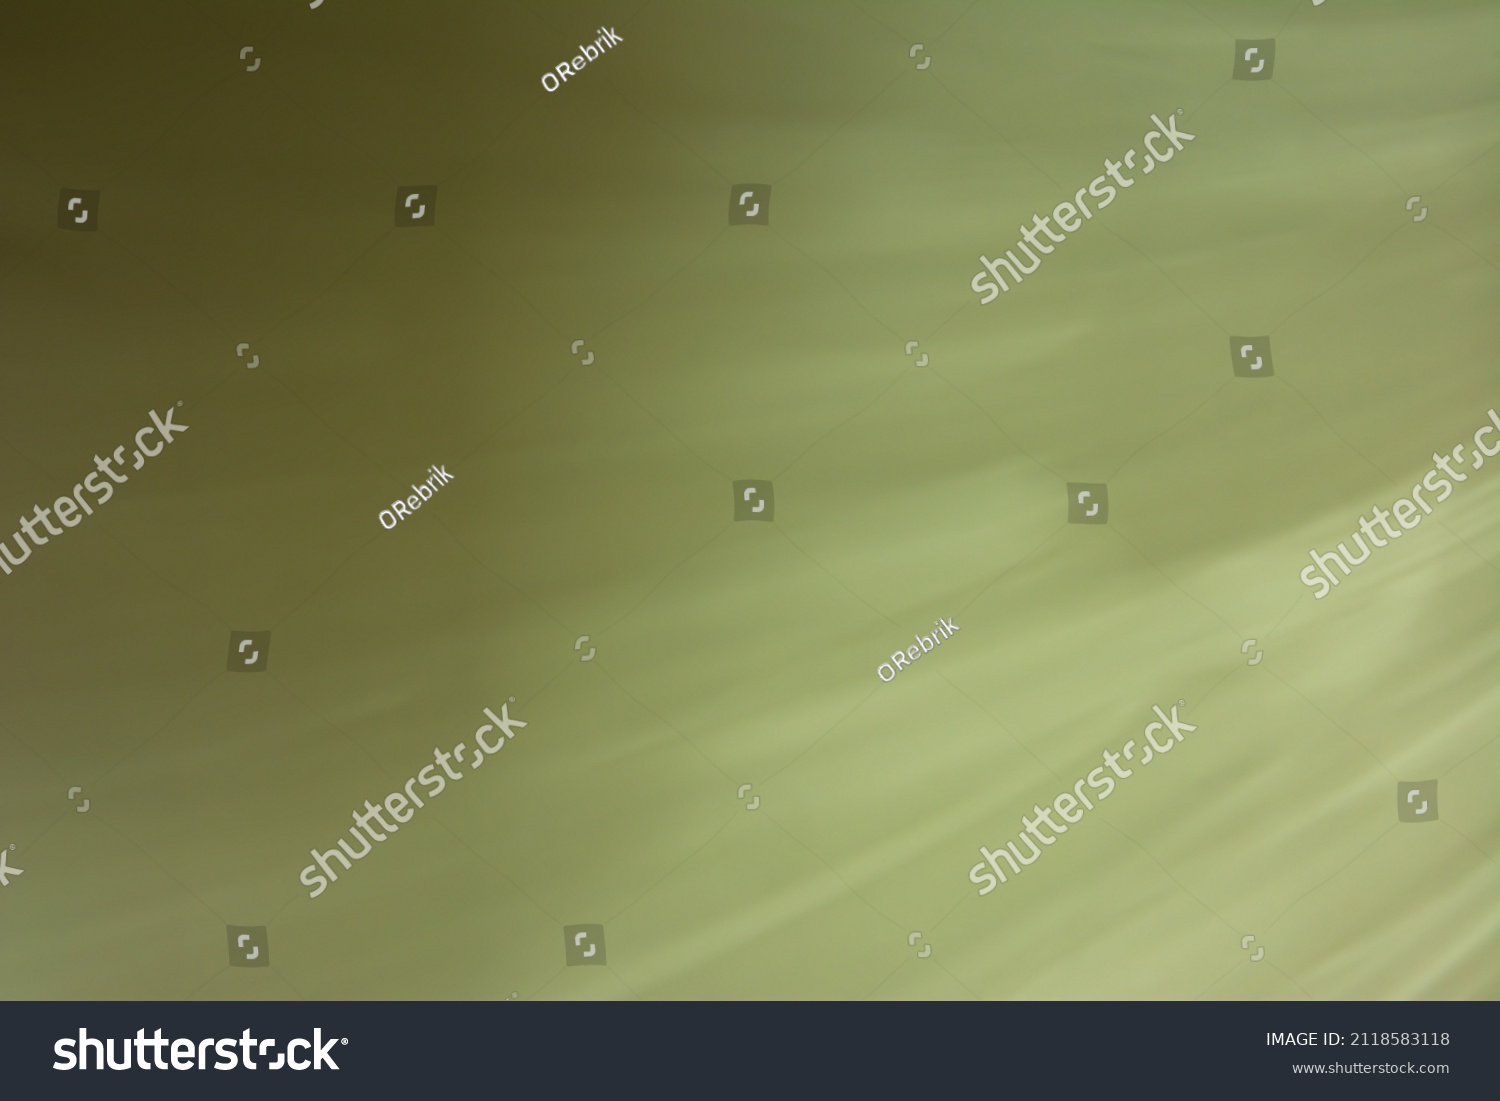 Stock Photo Olive Green Gray Abstract Banner Background Small Wave Lines From Light To Dark Soft Gradient 2118583118 